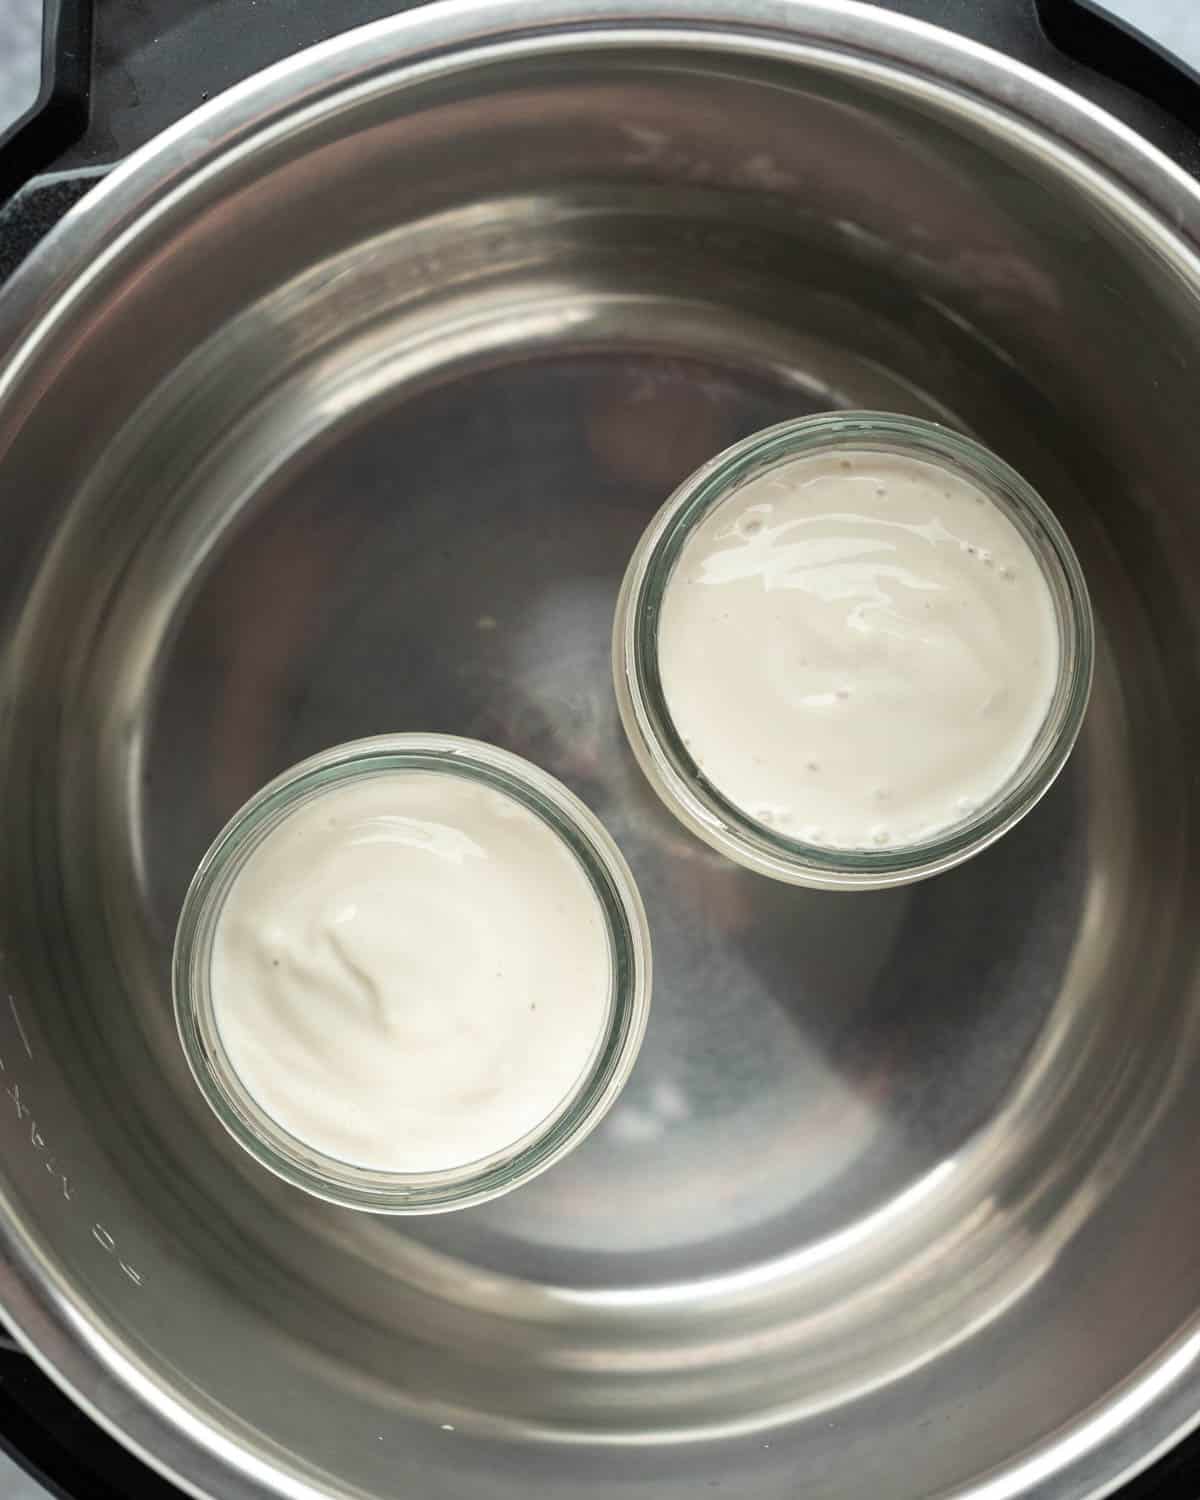 looking down into the Instant Pot showing two jars of homemade tofu yogurt.